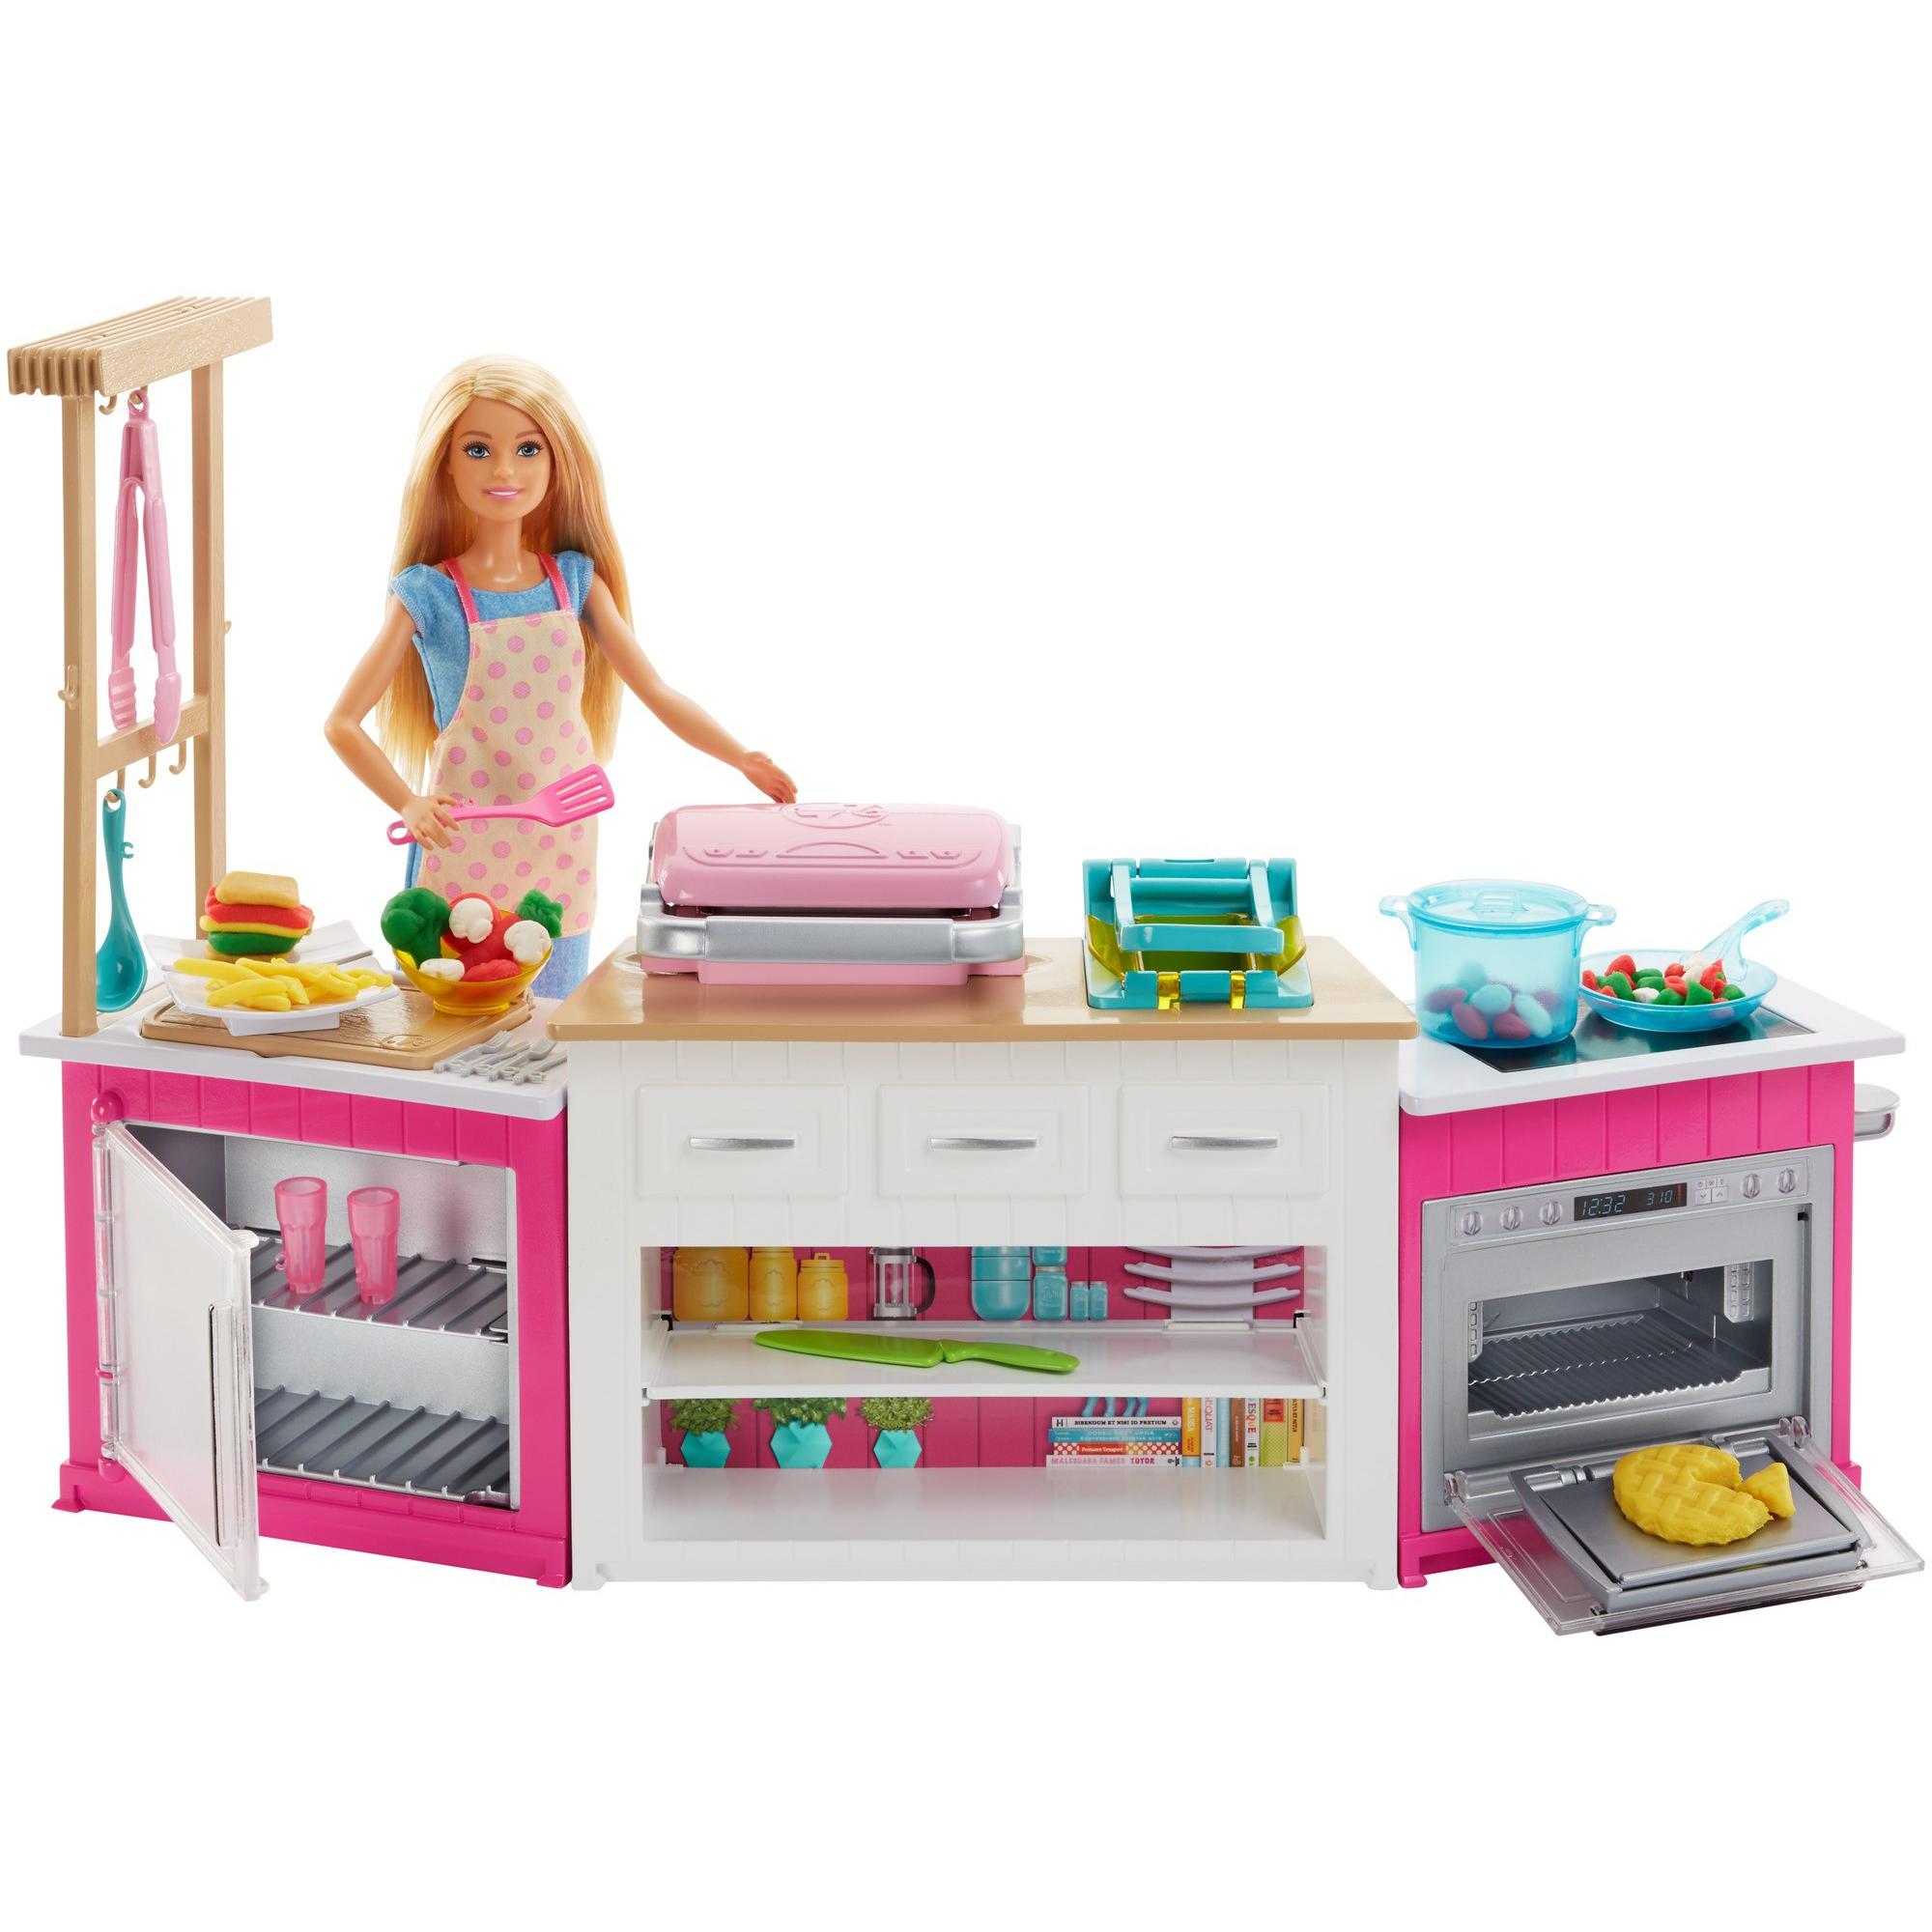 Barbie Ultimate Kitchen Cooking & Baking Playset with Chef Doll - image 1 of 8